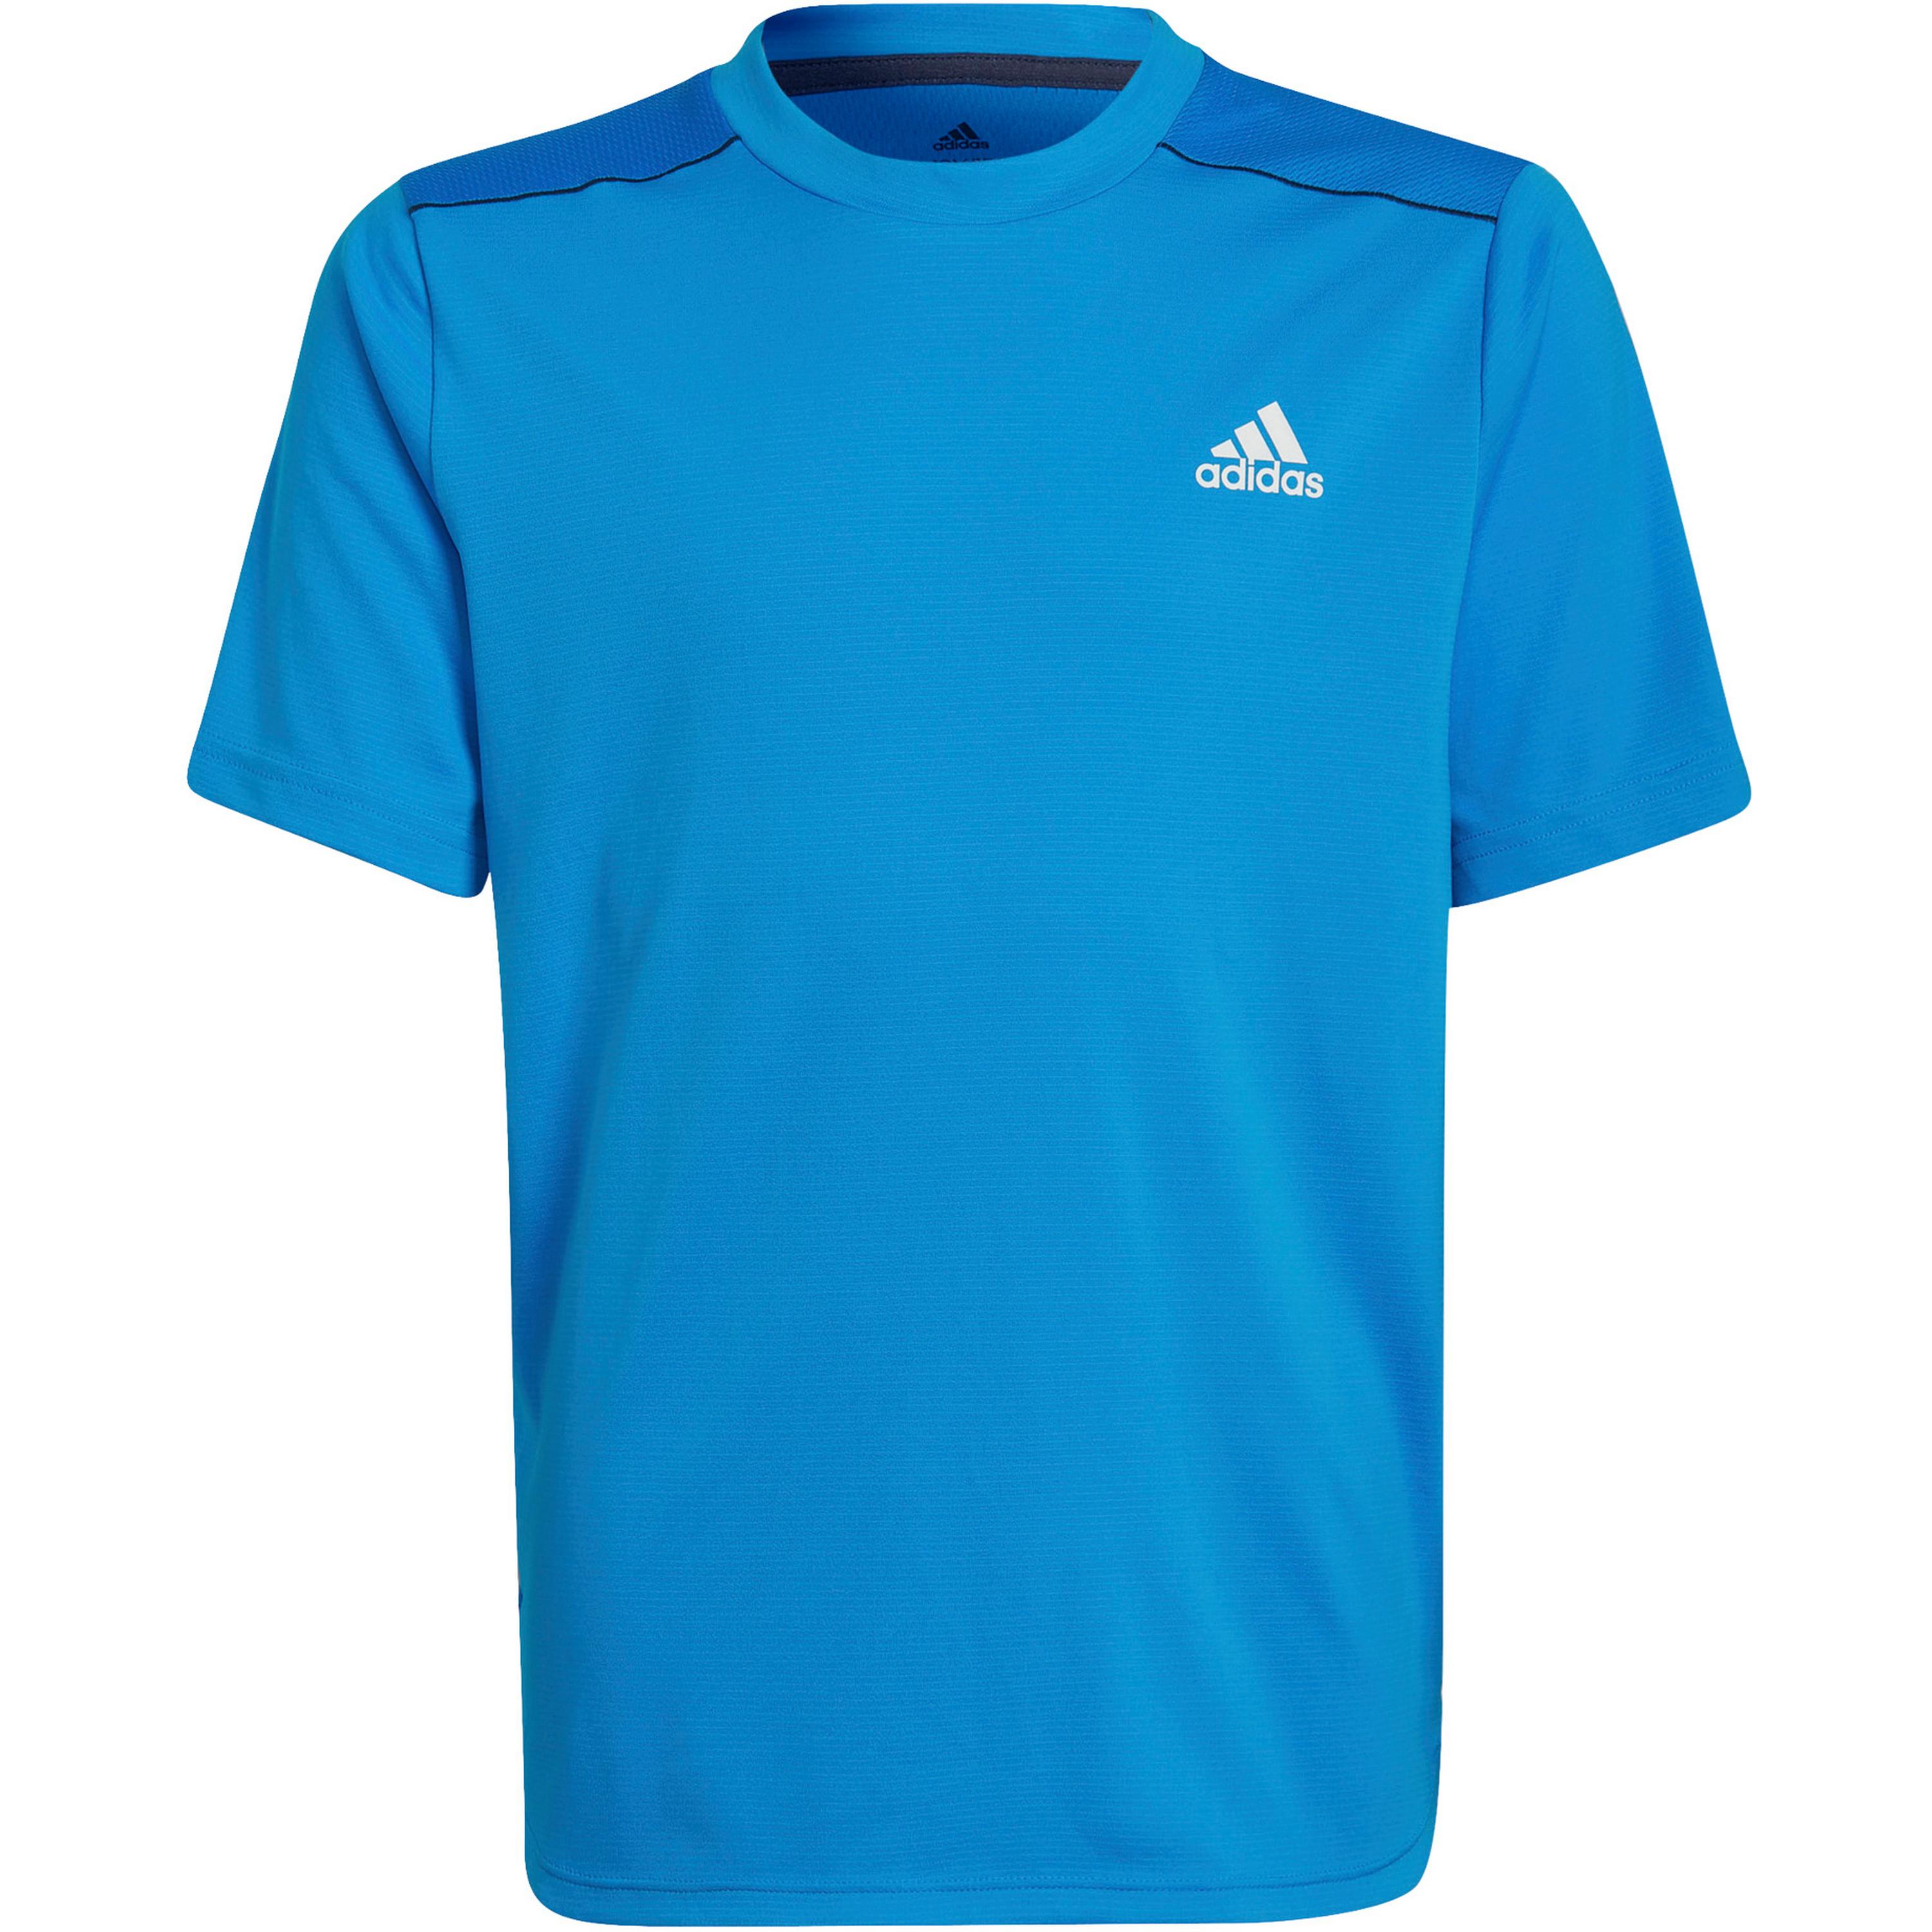 Image of adidas D4S SPORT ICONS Funktionsshirt Jungen